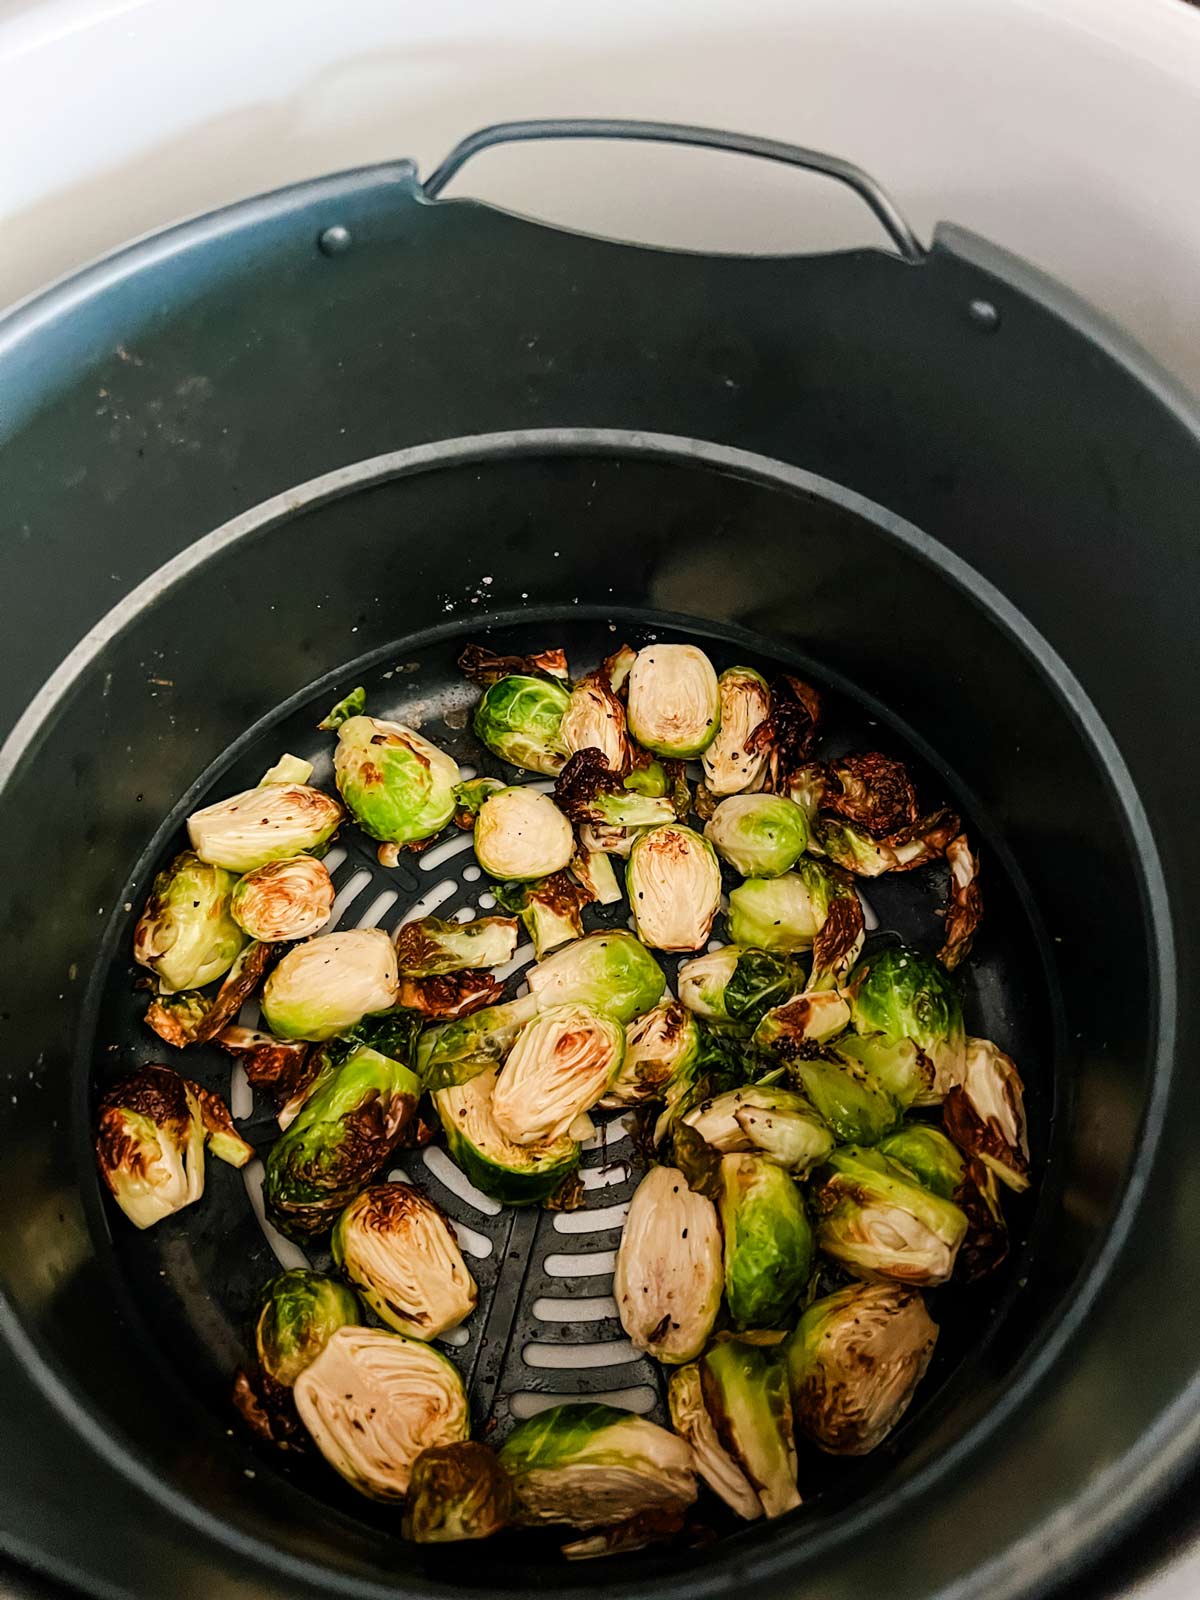 Brussels sprouts that have been cooked in a Ninja Foodi.